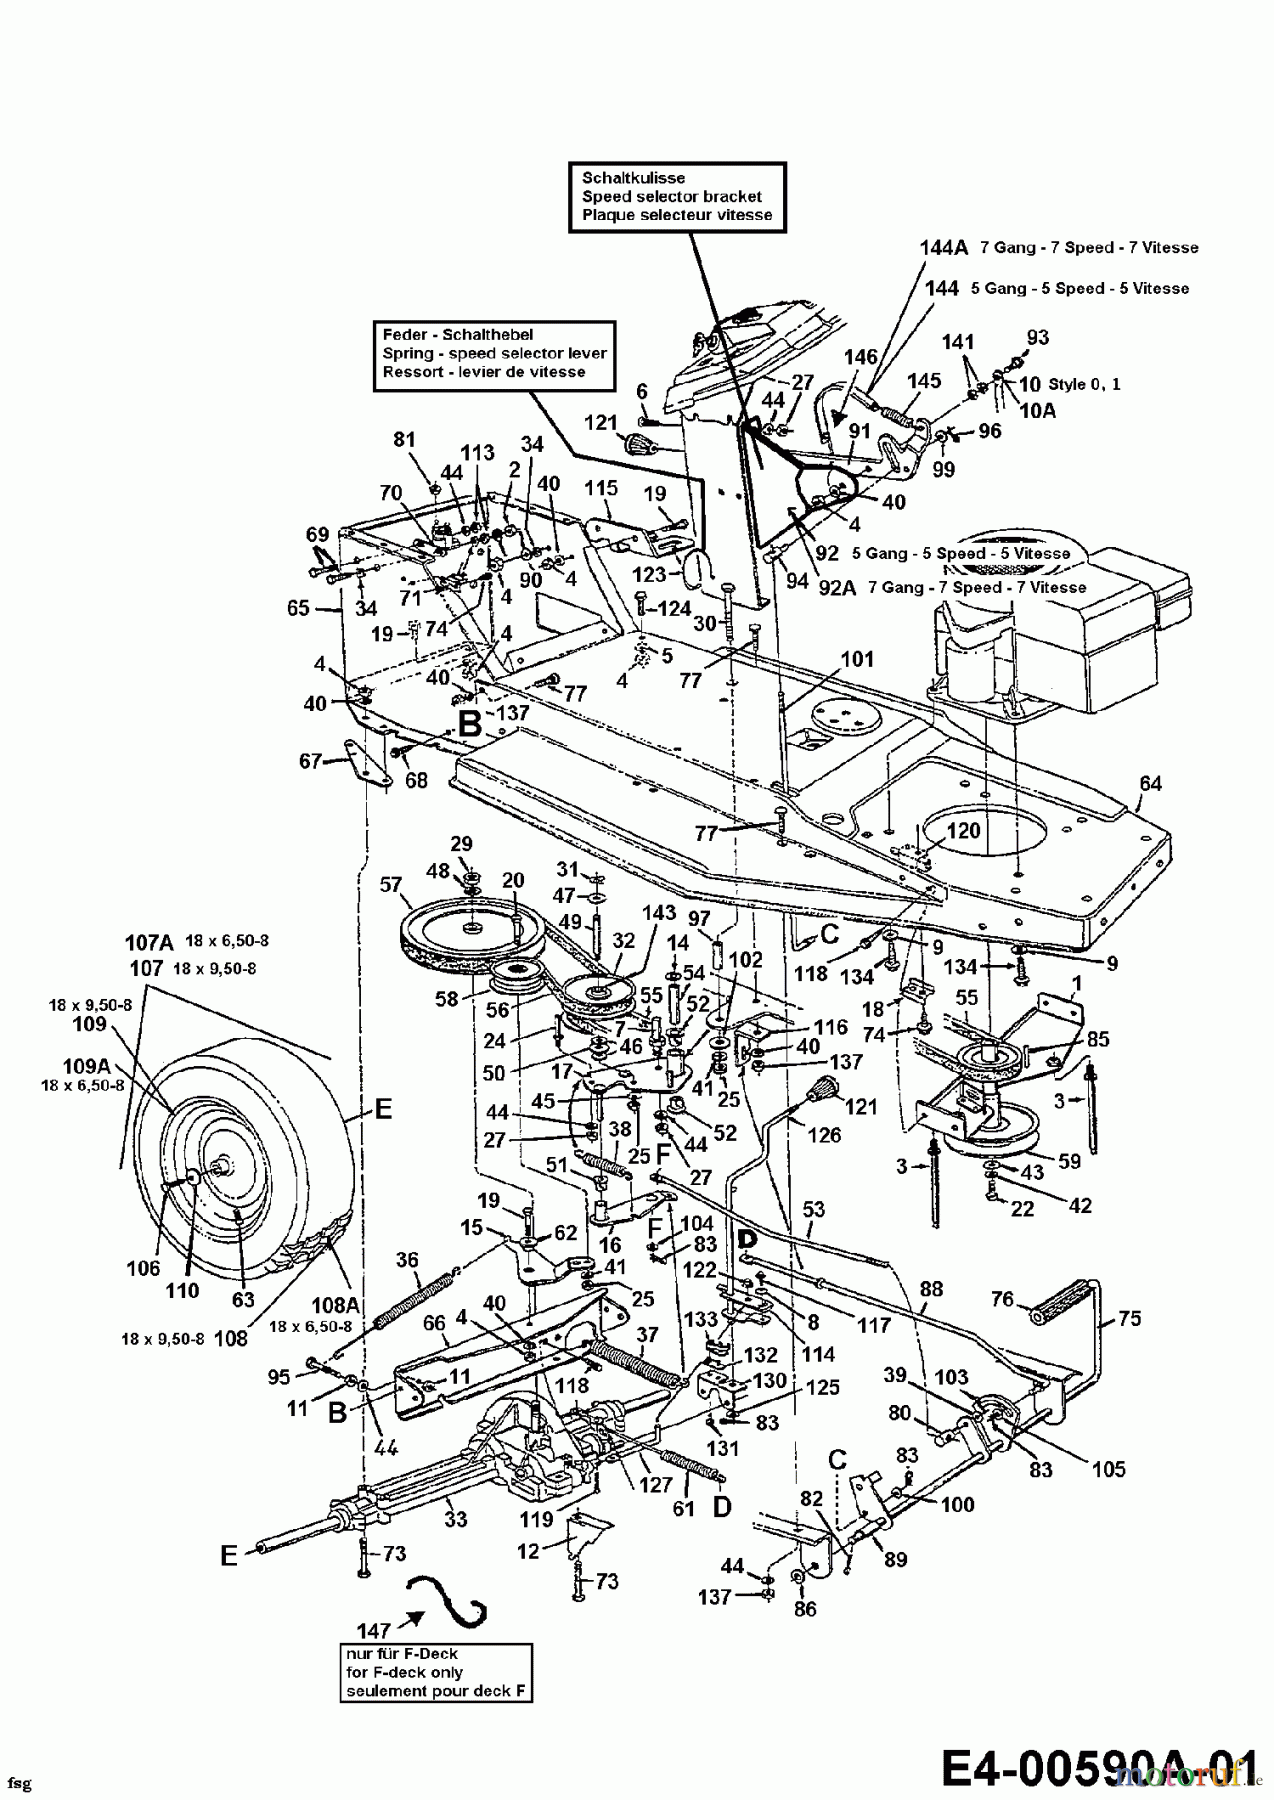  Raiffeisen Lawn tractors RMH 13-76 13A5472A628  (1998) Drive system, Engine pulley, Pedal, Rear wheels